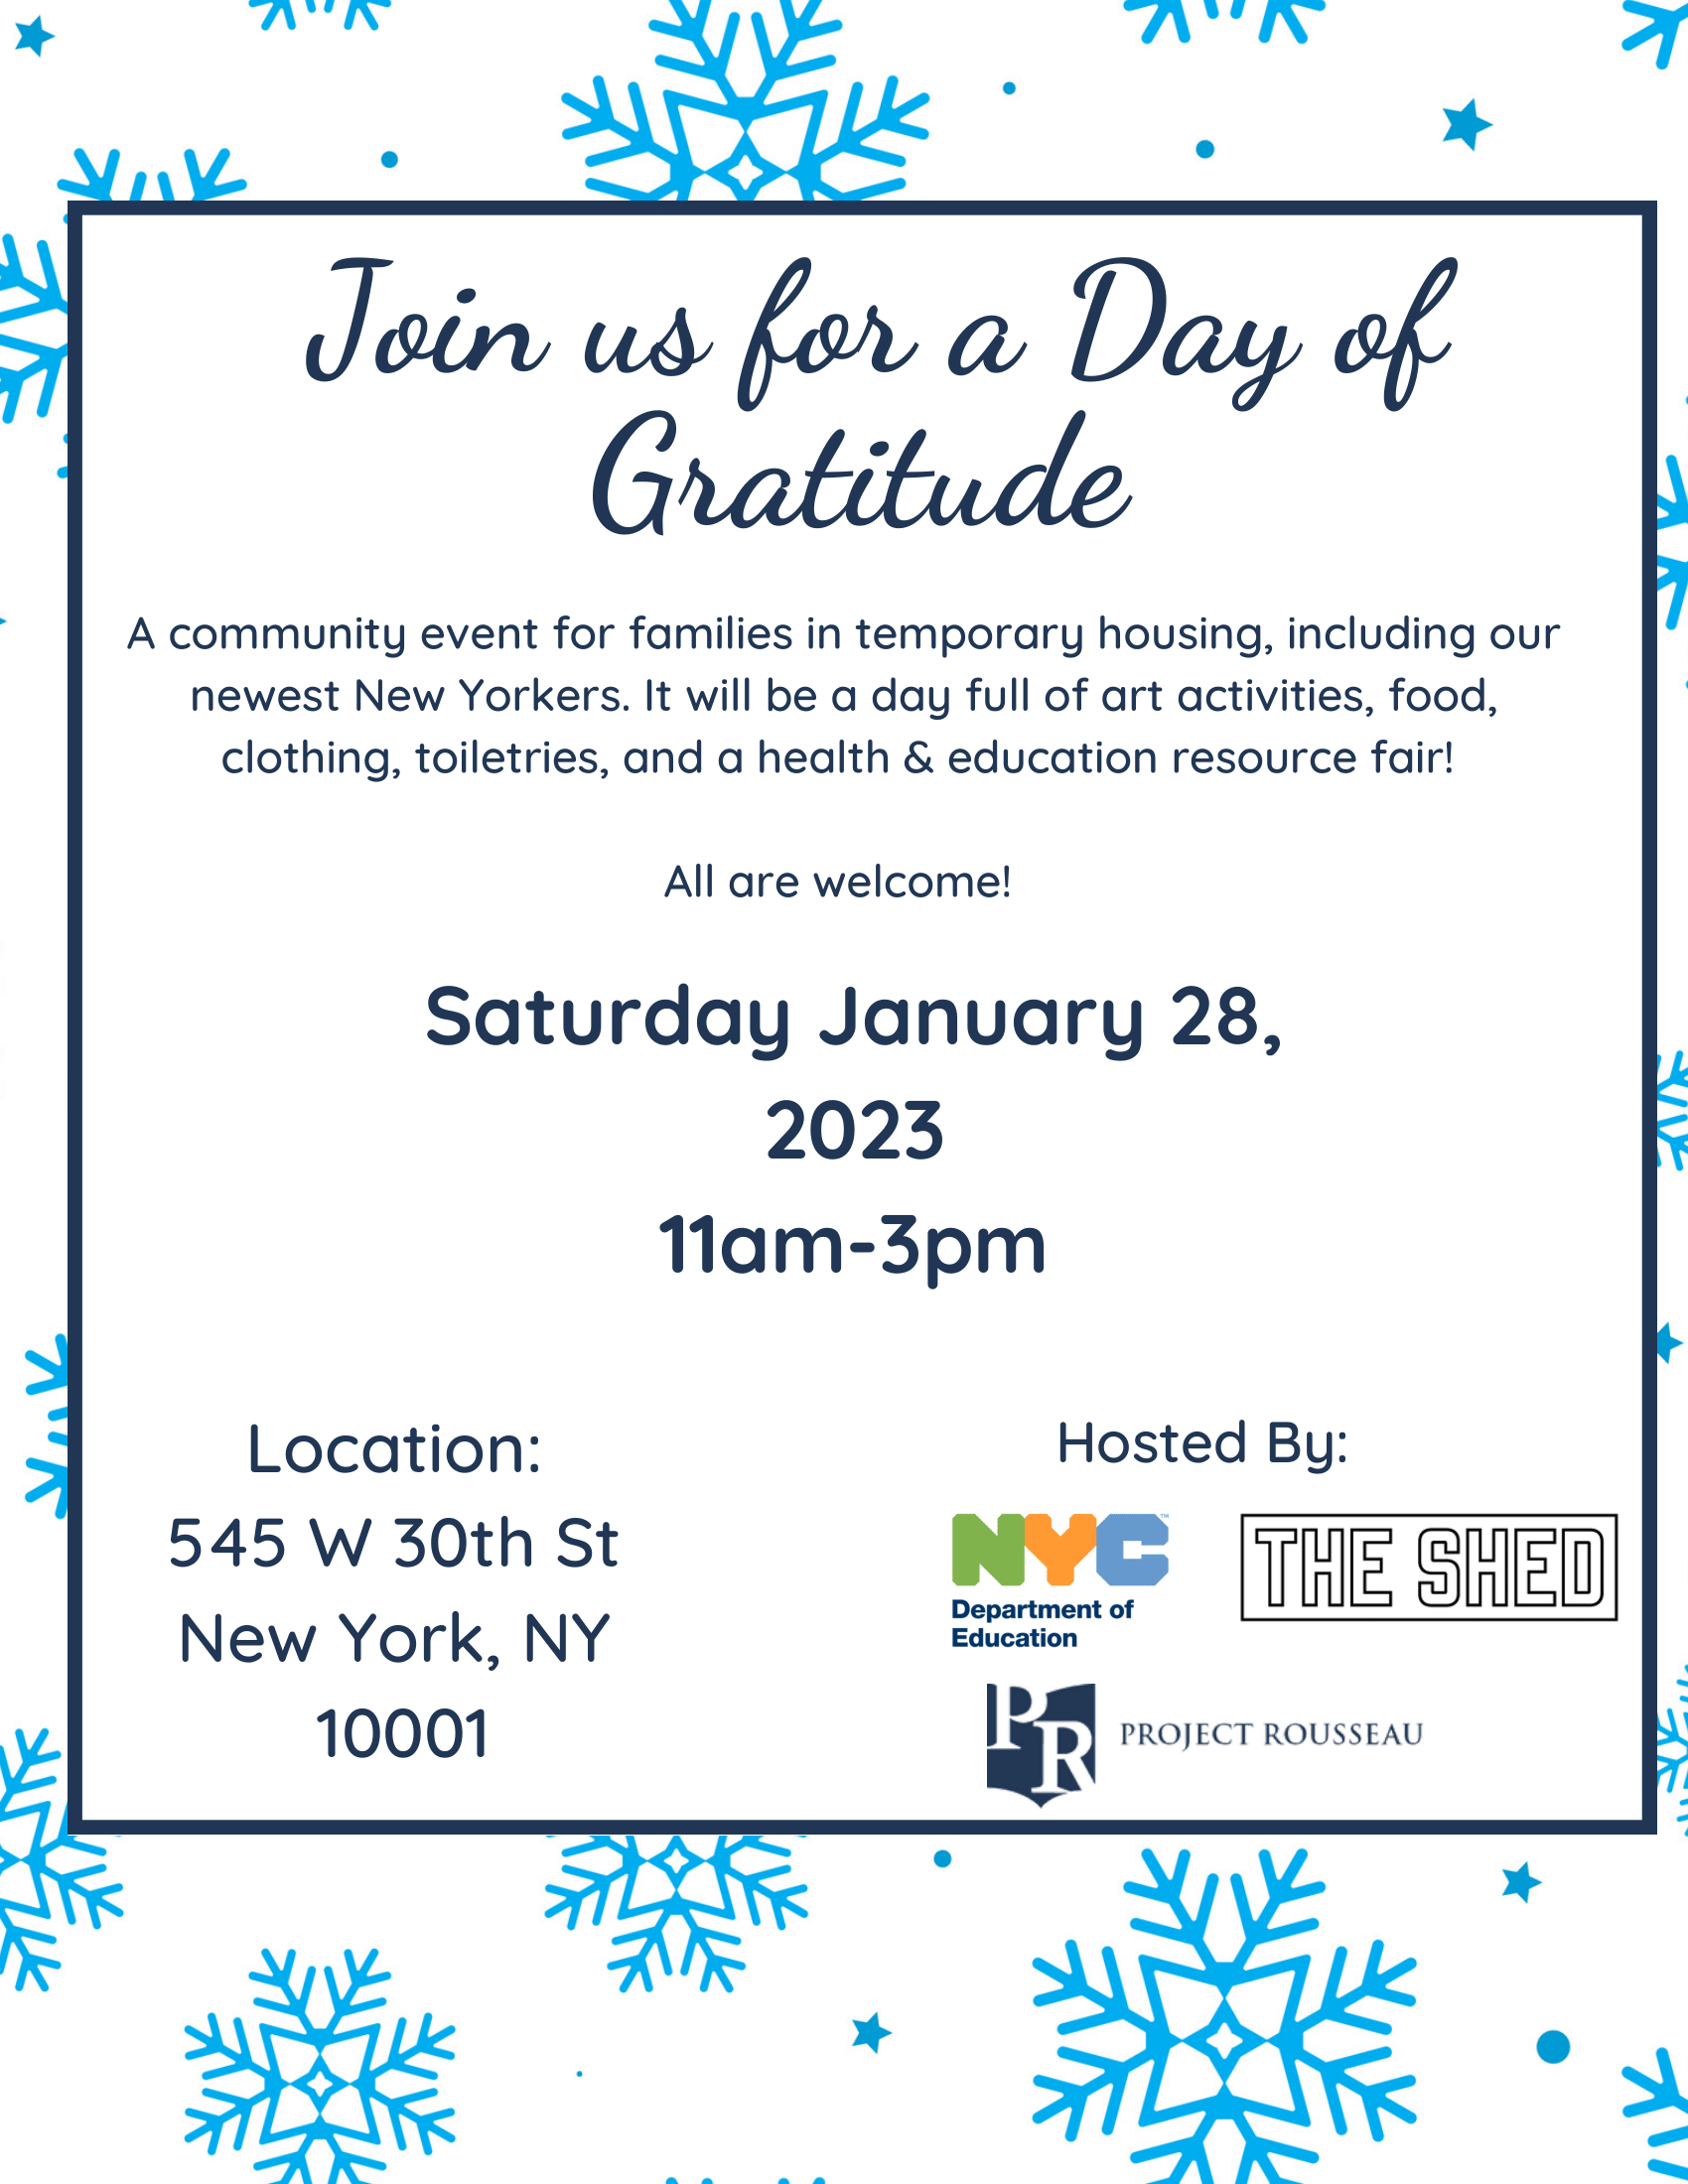 Join us for a Day of Gratitude